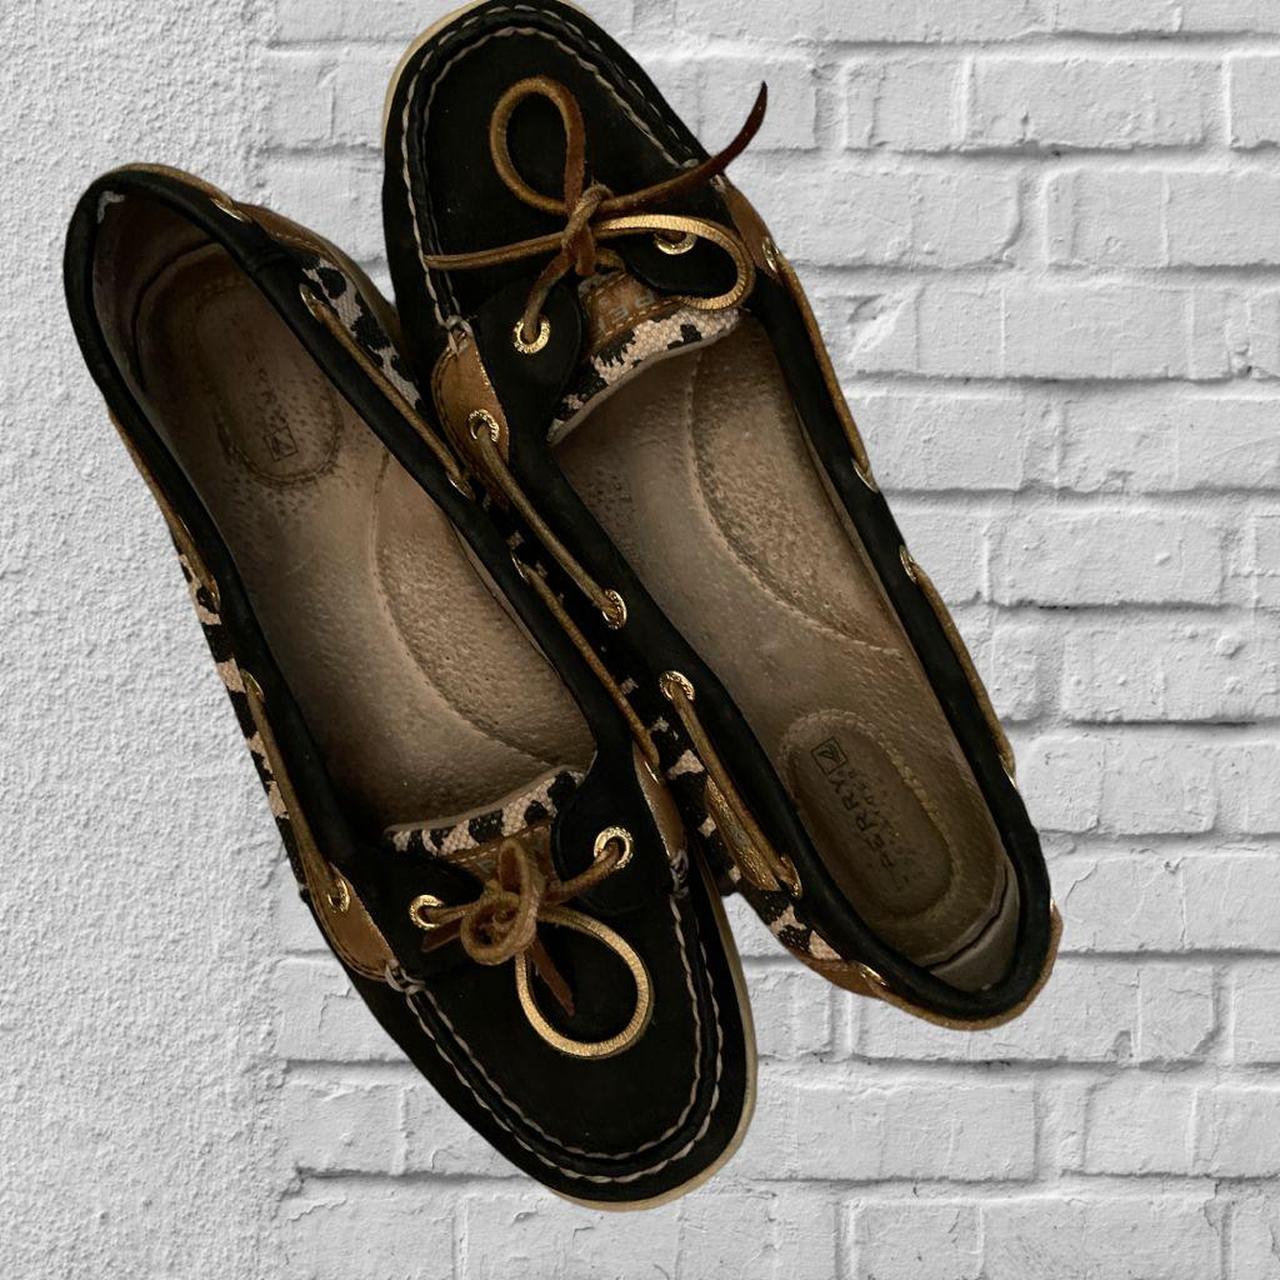 Sperry Women's Black and Gold Loafers (3)